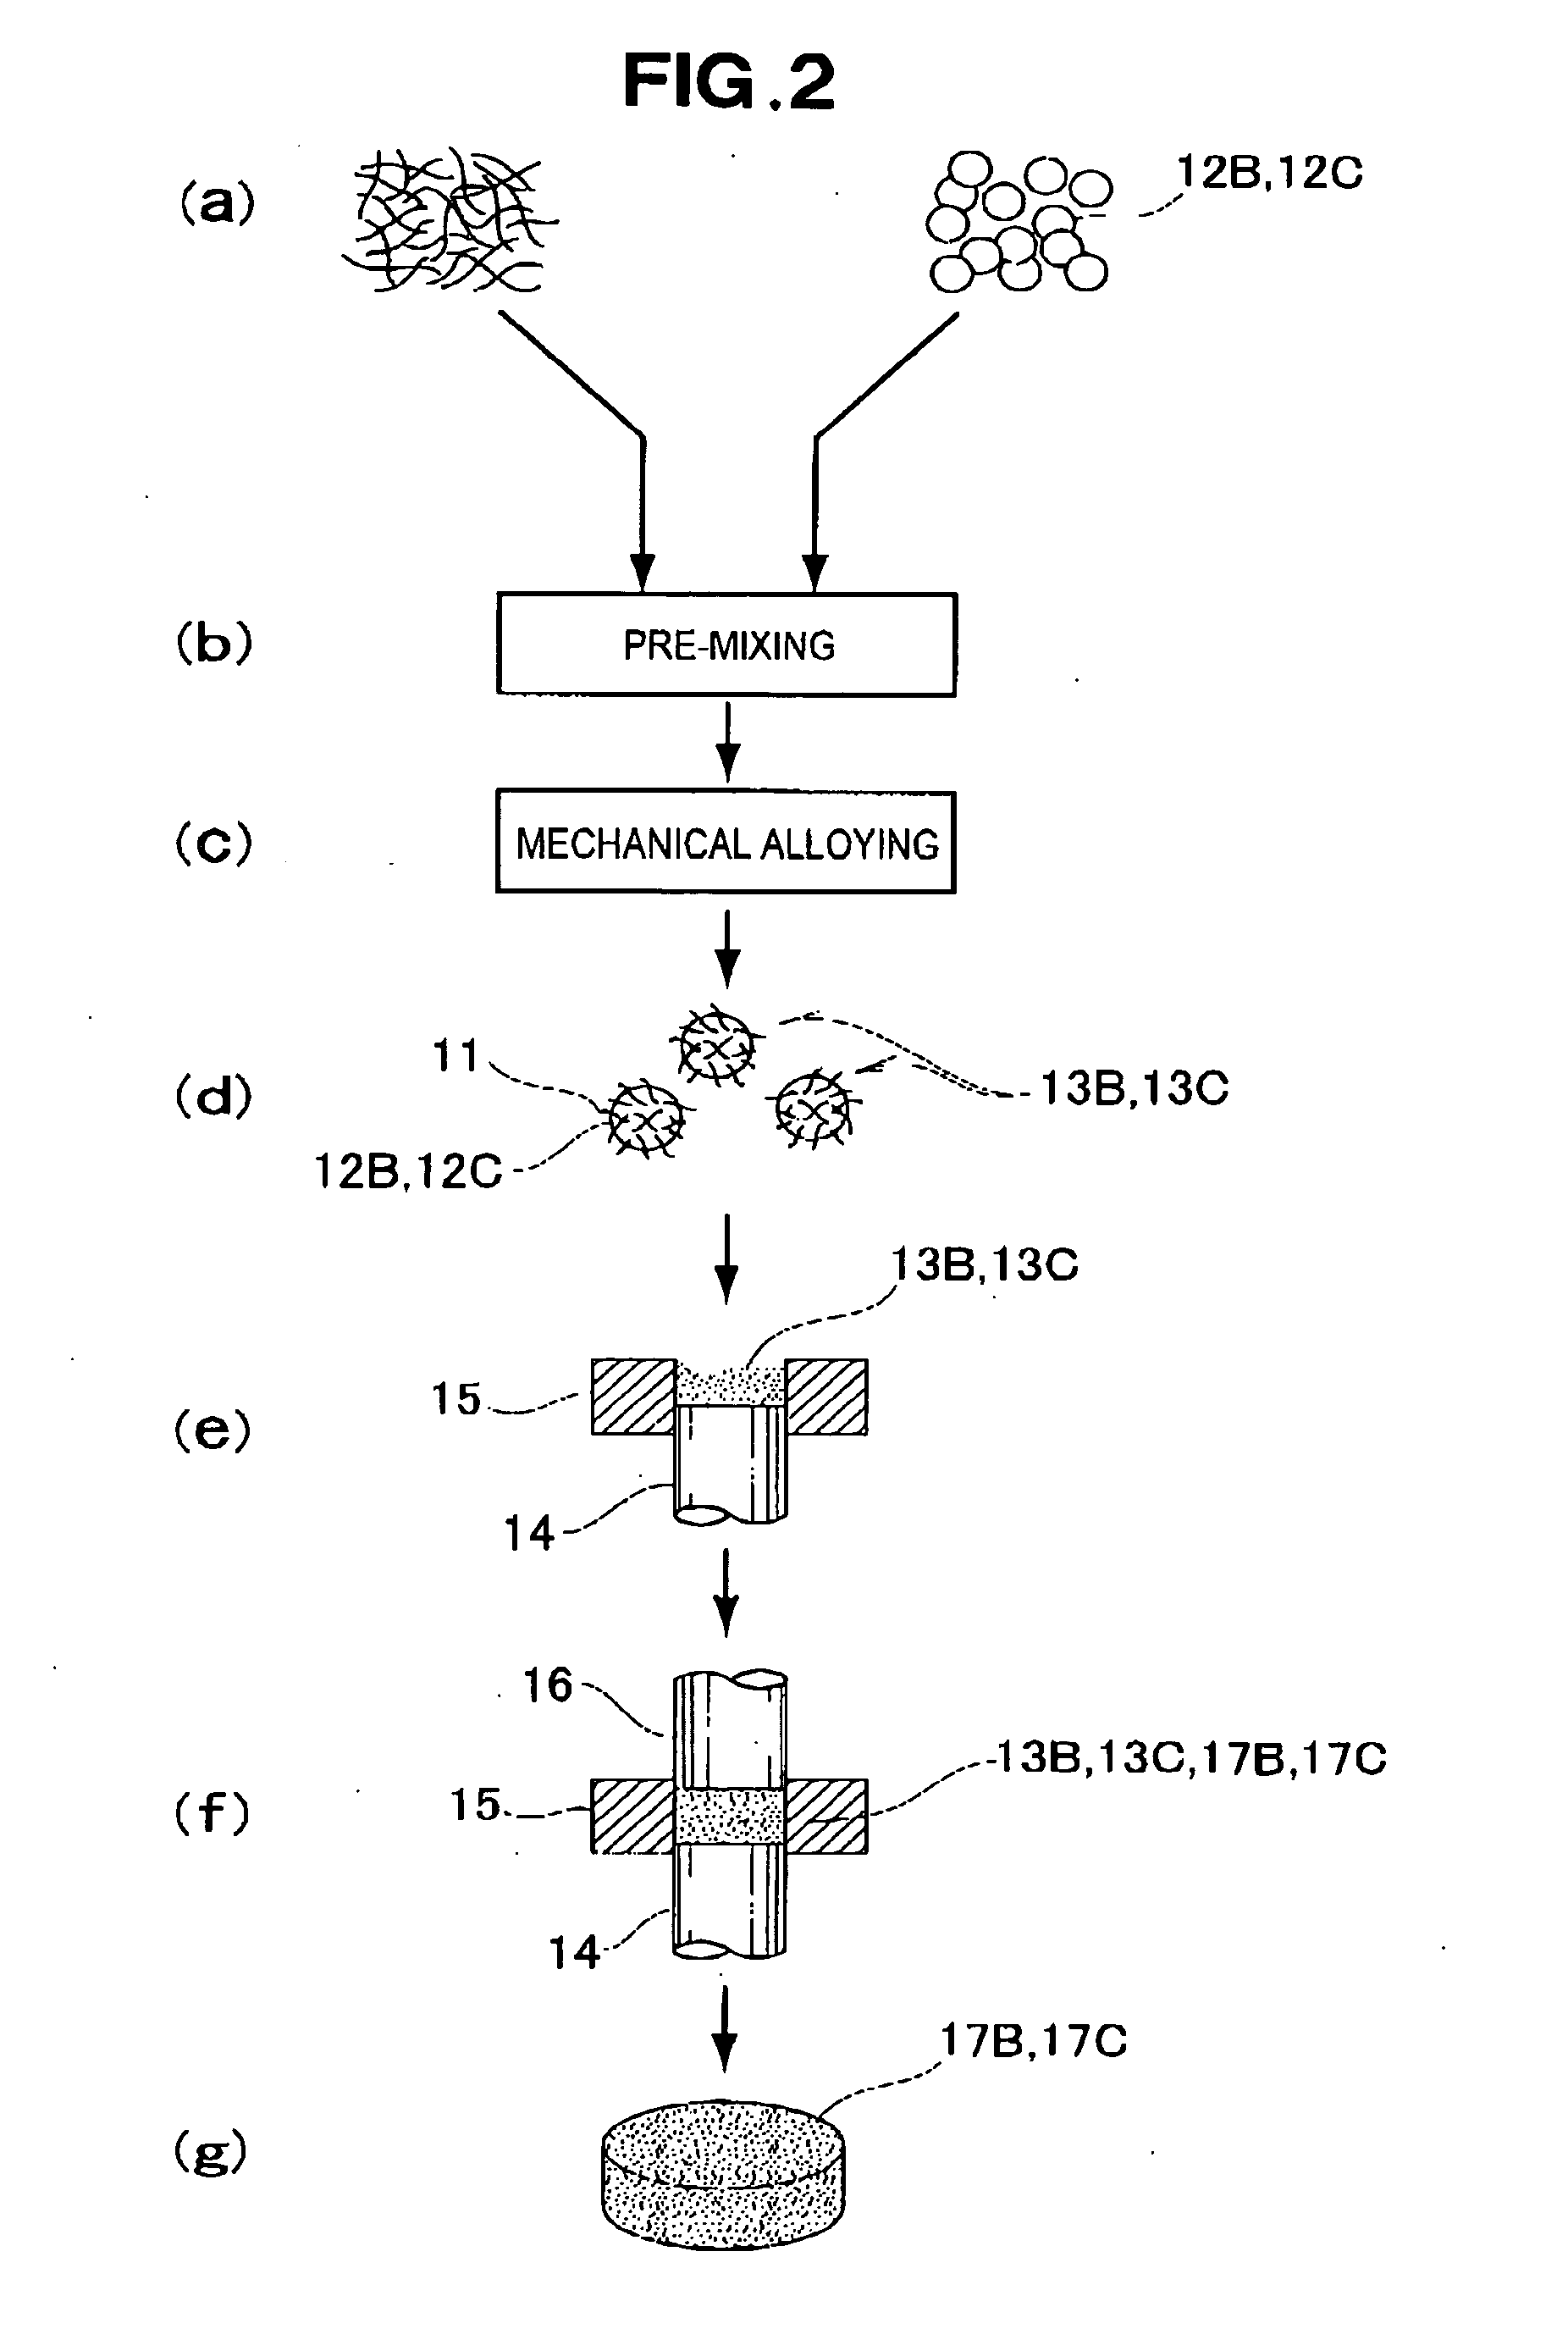 Method for manufacturing composite metal alloy and method for manufacturing article from composite metal